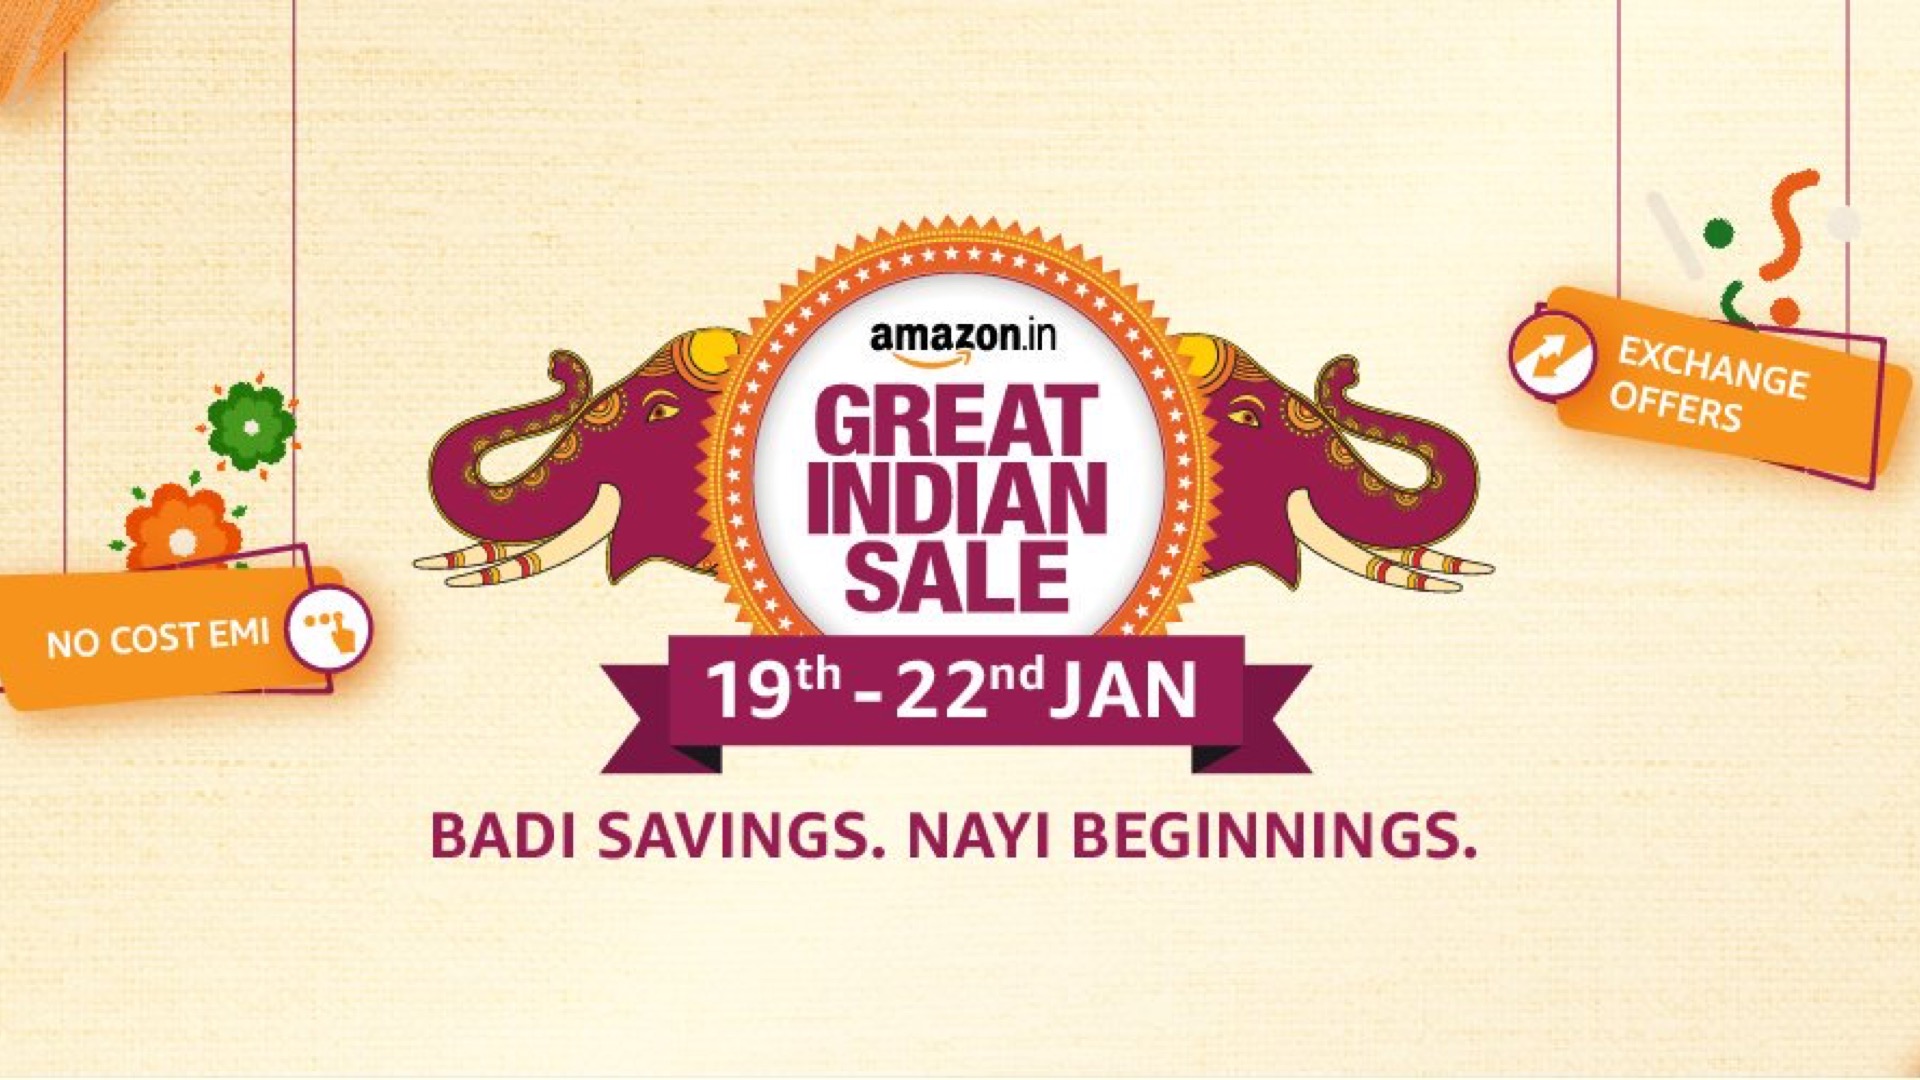 Amazon Great Indian Sale 2020 is live here are the best deals and